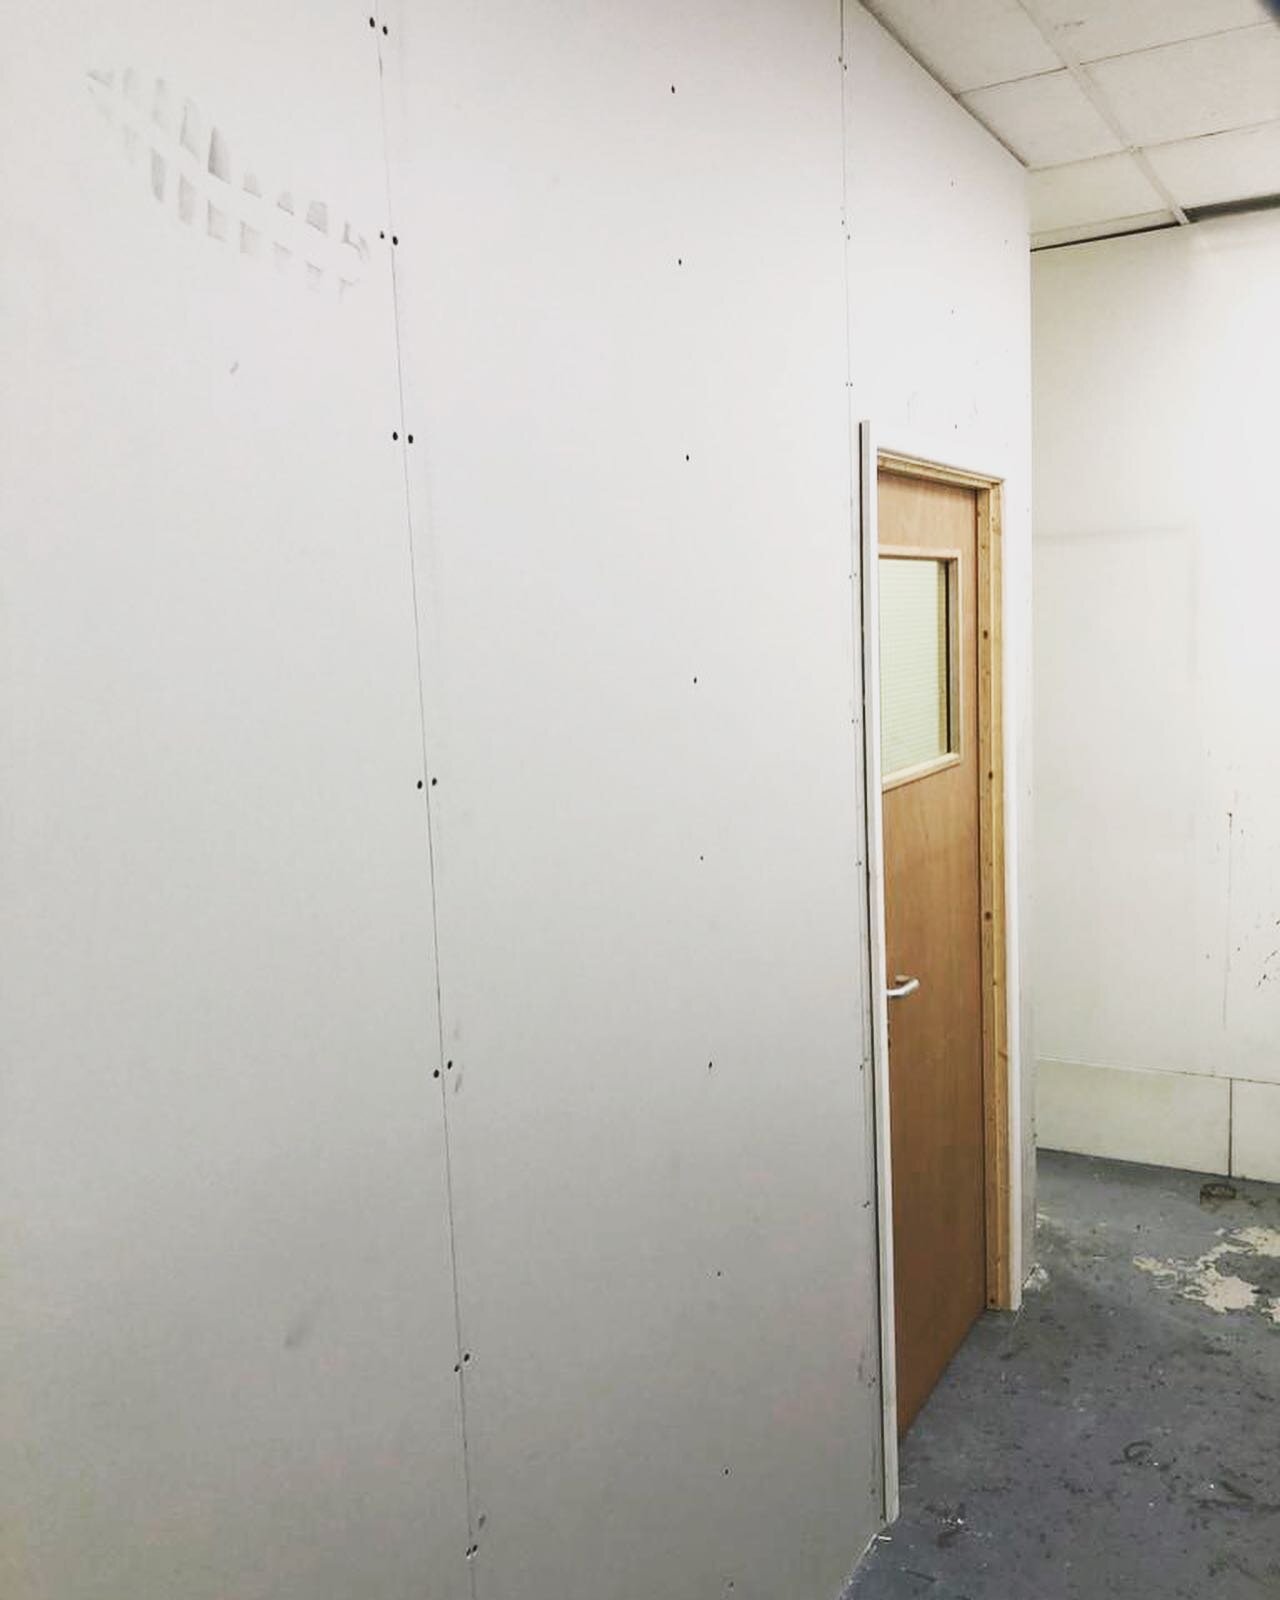 Workshop in Chichester, new office space required to comply with COVID 19 restrictions. 70mm metal stud and plasterboard partition with Howdens glazed vision panel door. Installed in a morning for minimal disruption

#suspendedceiling
#suspendedceili